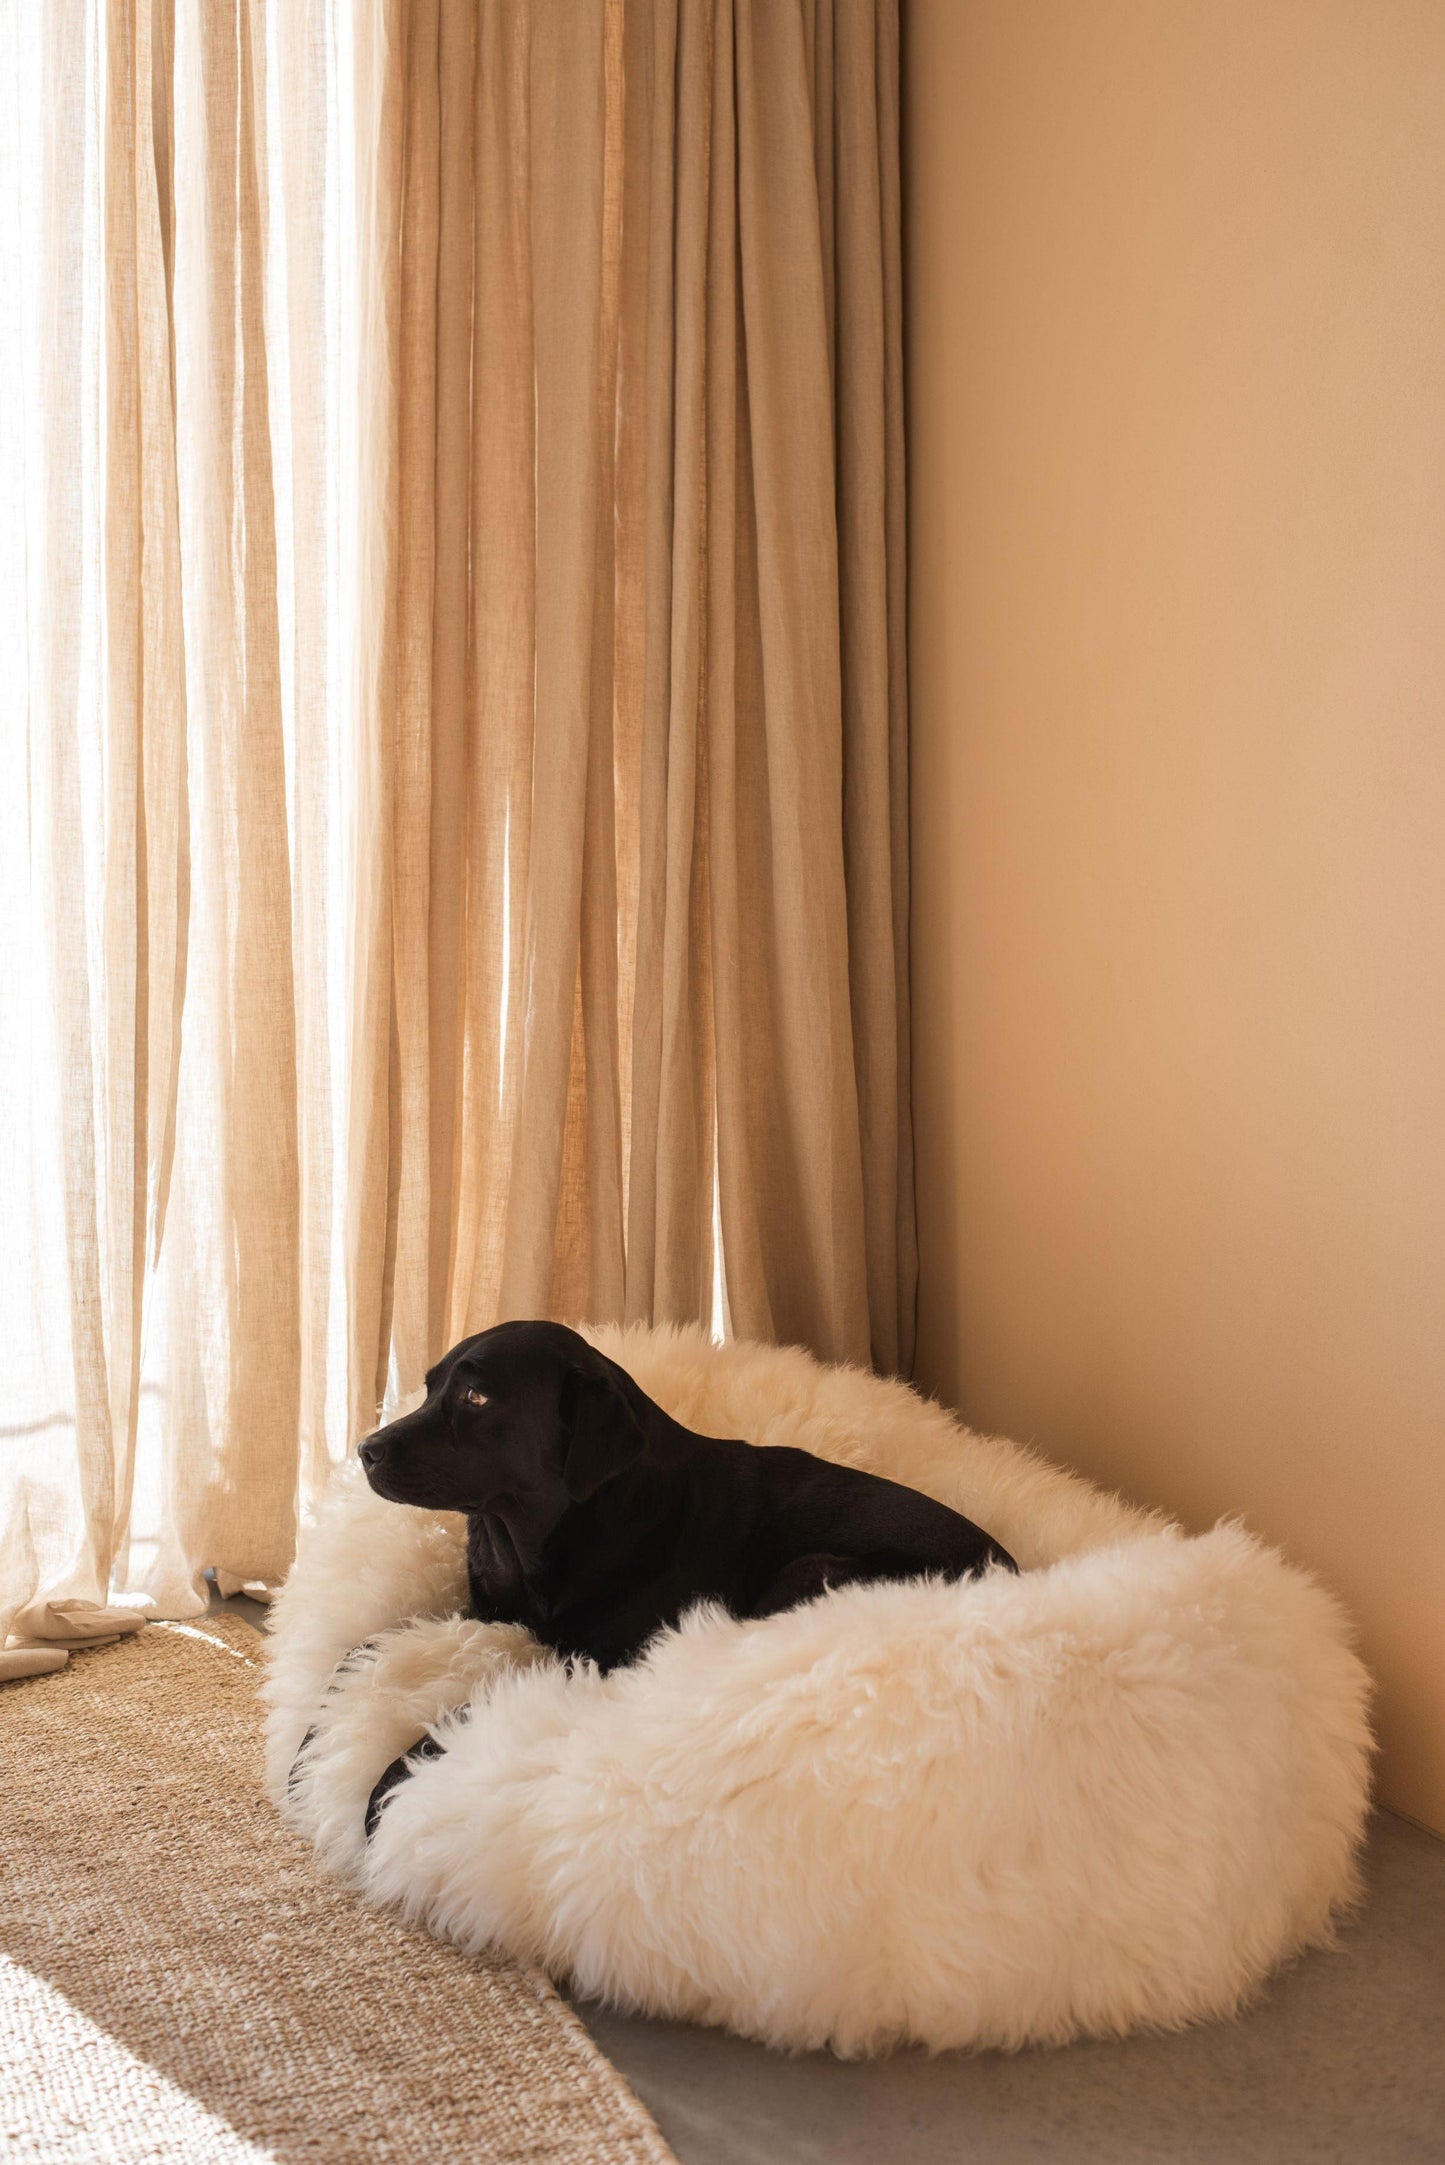 A black dog lounging on a Mellow Pet Store Oval Natural Sheepskin Pet Bed in front of curtains.